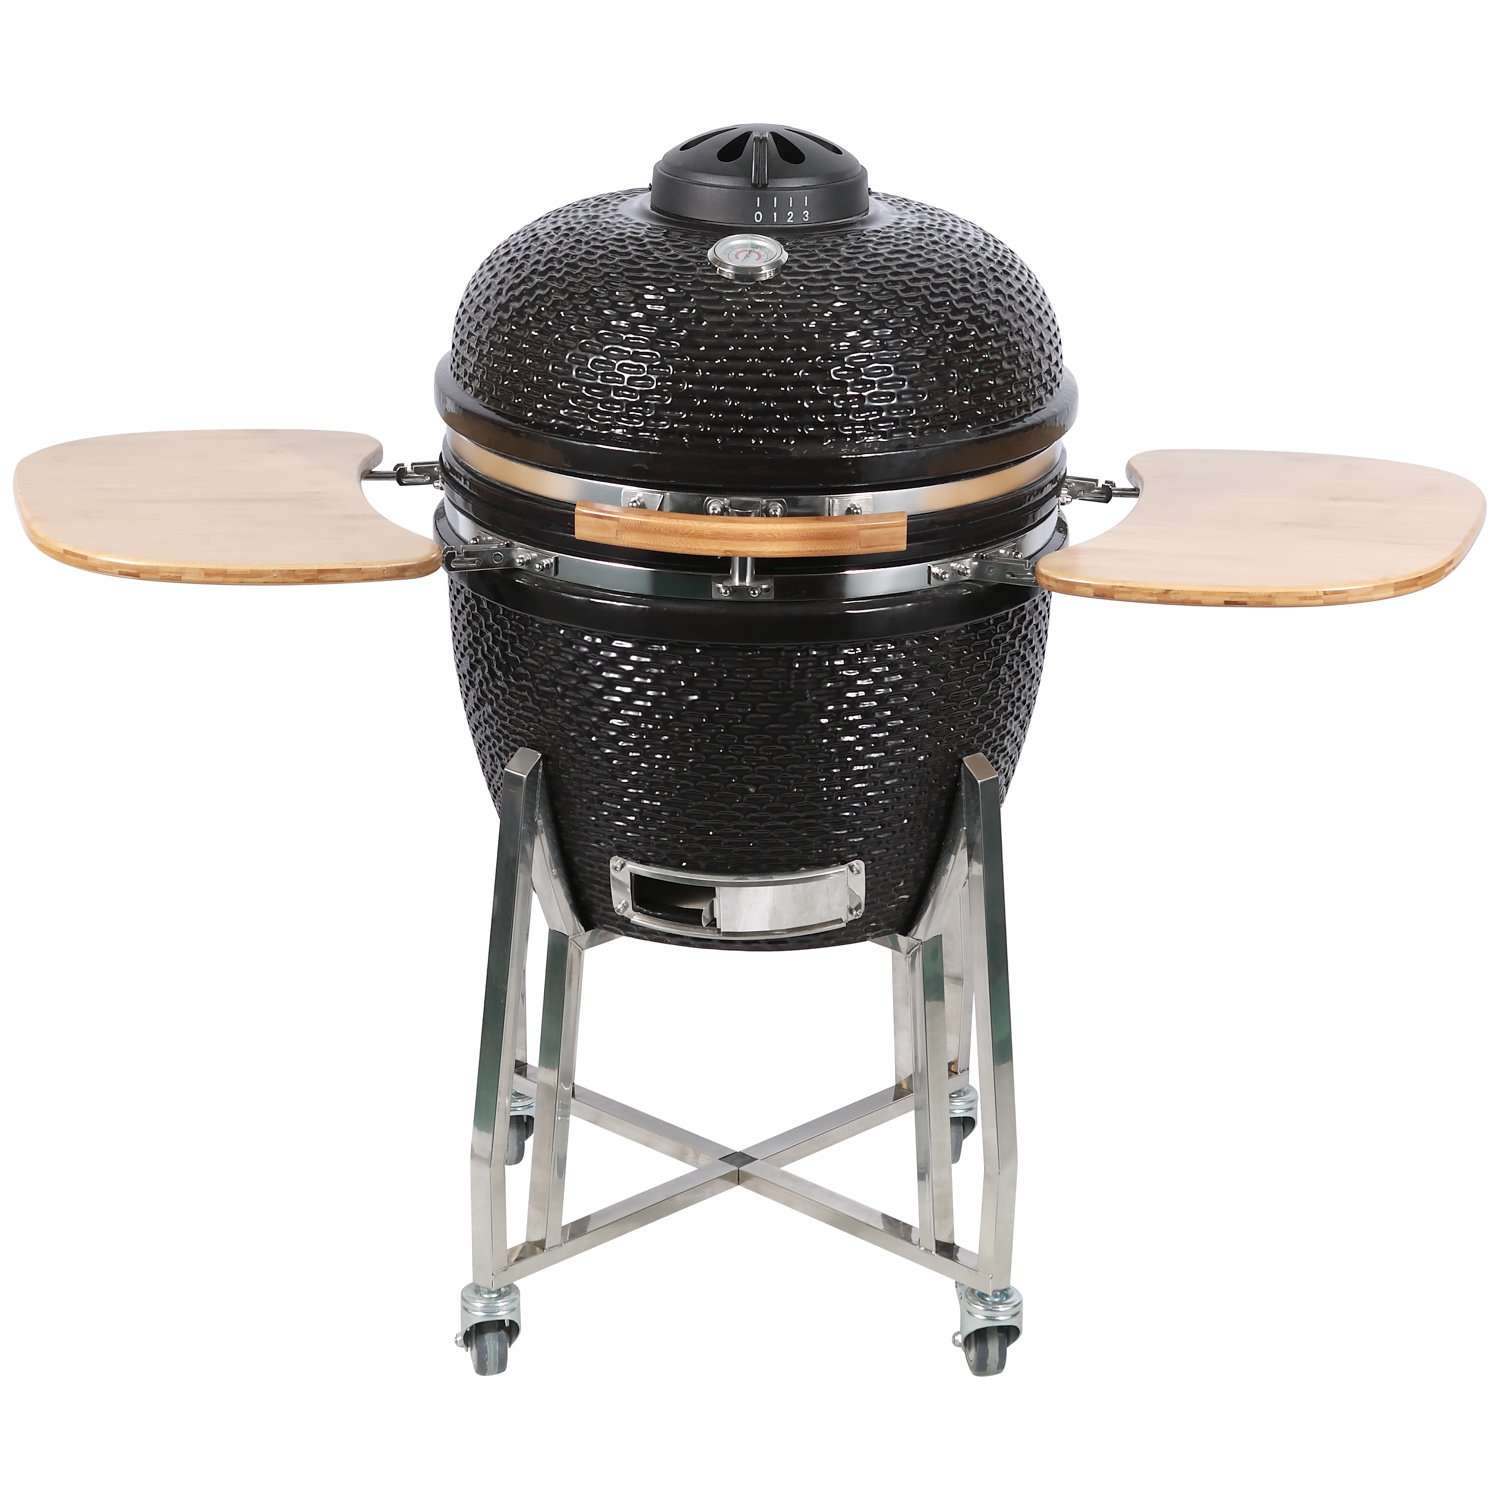 China 22inch Widely Hot Sale Big Green Egg for Different ...